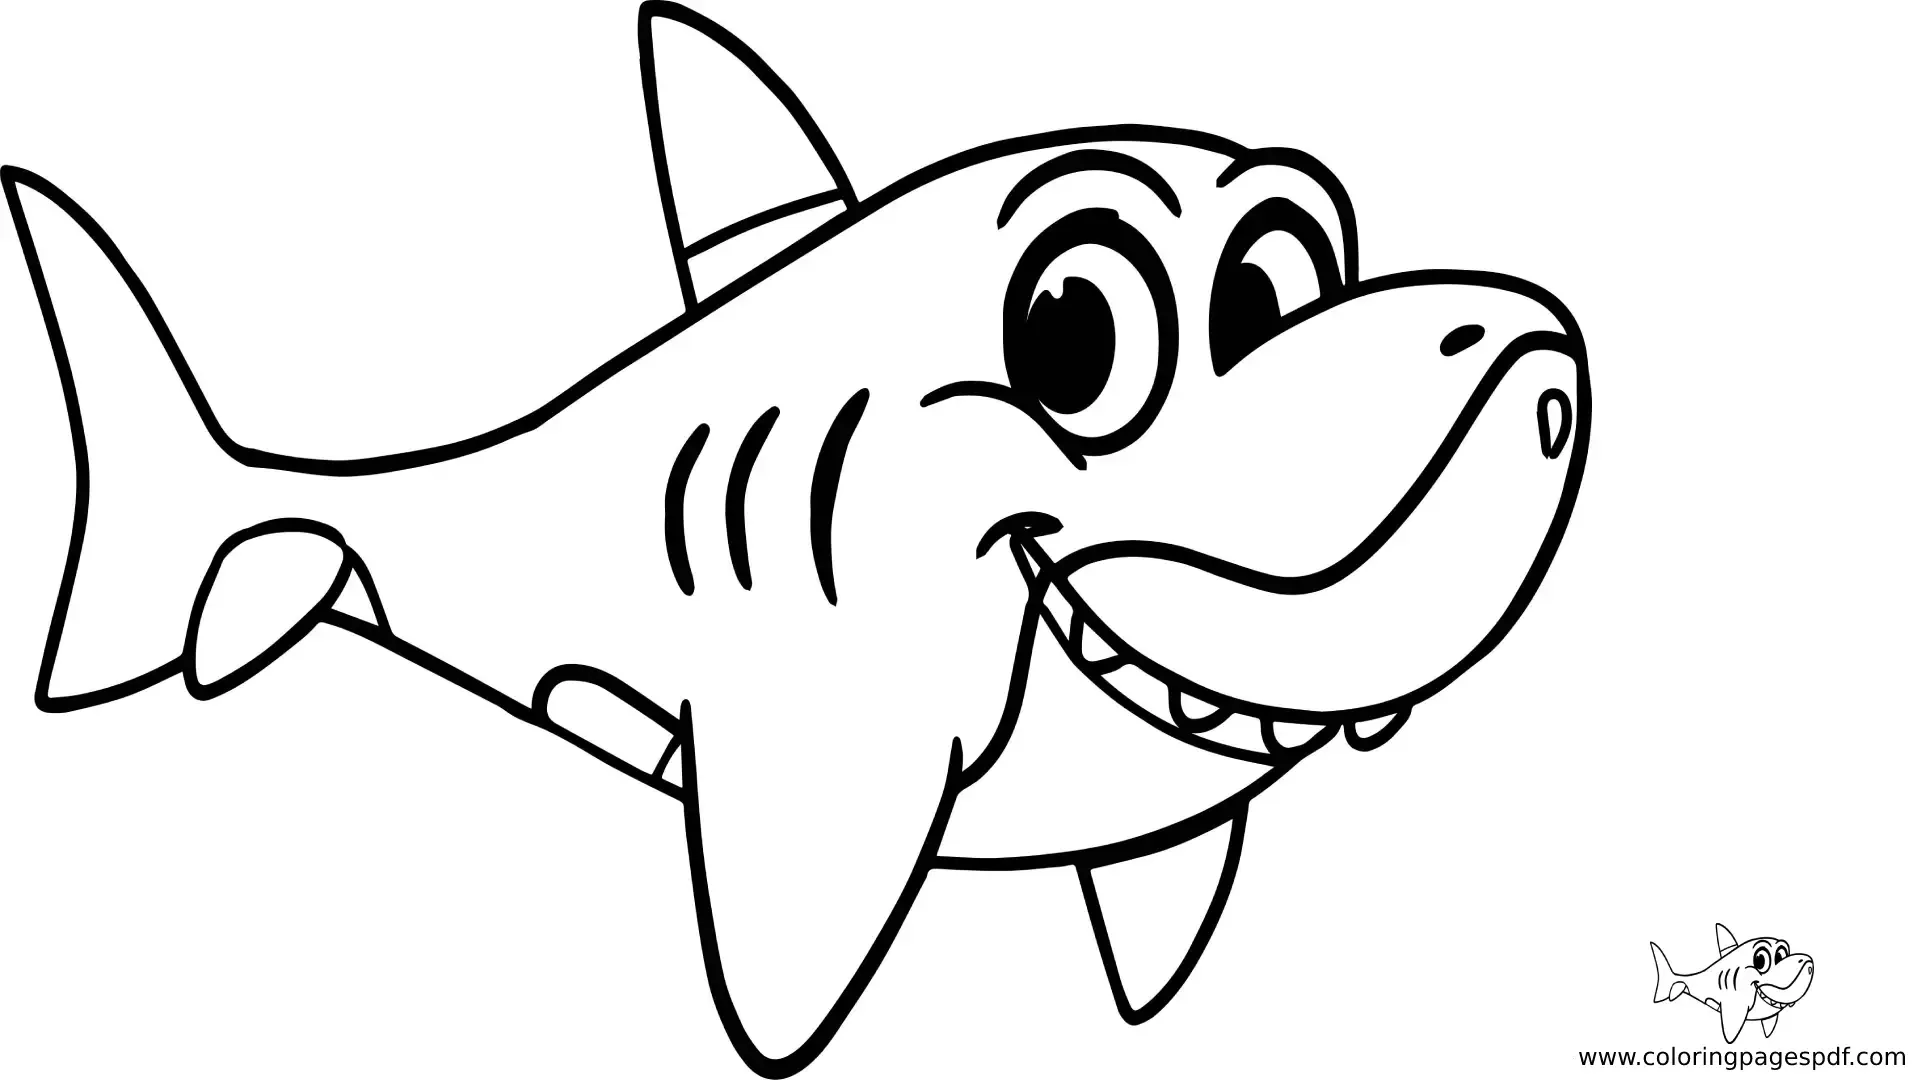 Coloring Pages Of A Cute Shark